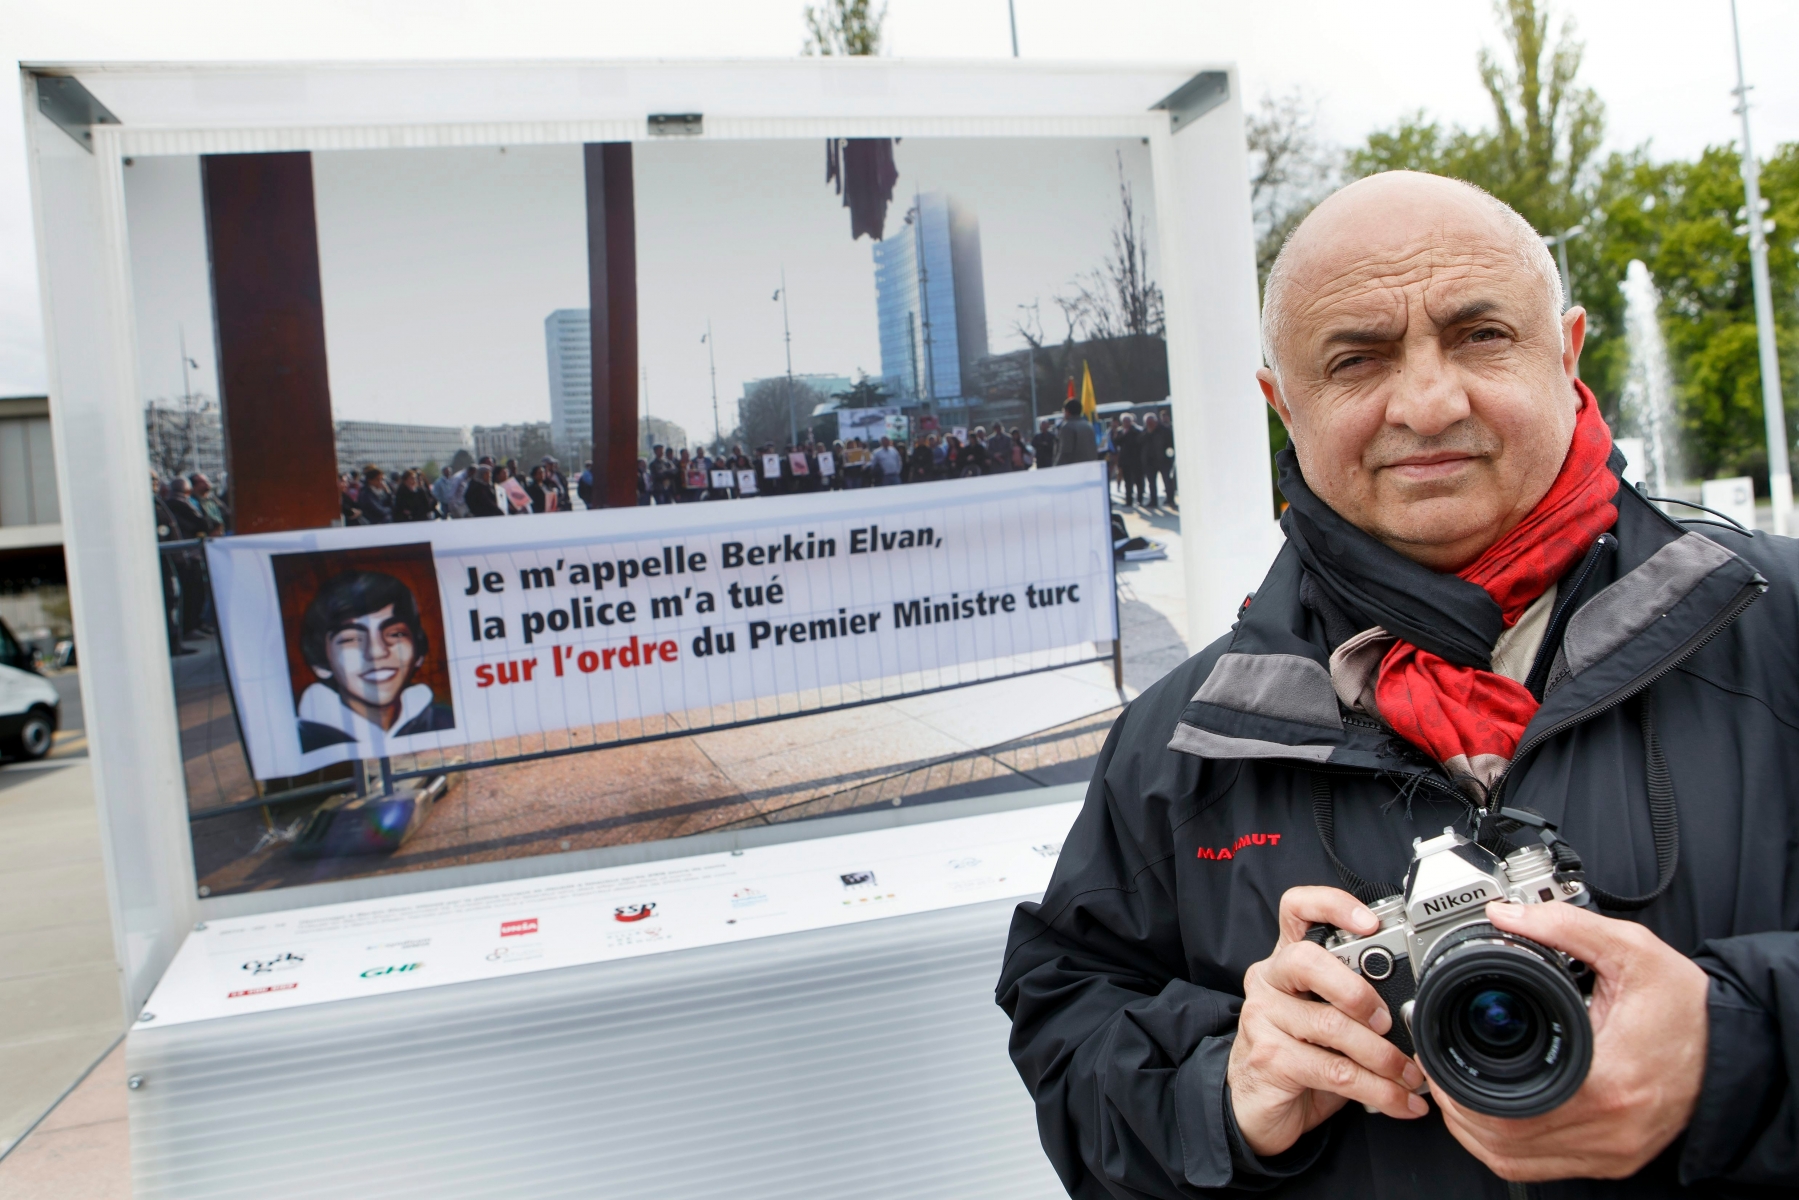 Geneva's Kurdish and Armenian photographer Demir Soenmez poses for the media next to his picture with caption "Tribute to Berkin Elvan, wounded by Turkish police in Istanbul who died after 269 days of coma" displayed on the Place des Nations in front of the European headquarters of the United Nations in Geneva, Switzerland, Monday, April 25, 2016. A photo displayed on the Place des Nations, which calls into question the current Turkish President Recep Tayyip Erdogan angered Turkey. Its consulate requested the withdrawal of the picture. The city of Geneva will focus Tuesday on the request. The Geneva's Kurdish and Armenian photographer Demir Soenmez exposes until Sunday 58 photos of events on the Place des Nations. Among them was a banner in March 2014 which made responsible Erdogan, Prime Minister, of the death of a teenager during a protest in Istanbul. (KEYSTONE/Salvatore Di Nolfi) SWITZERLAND PICTURE EXHIBITION